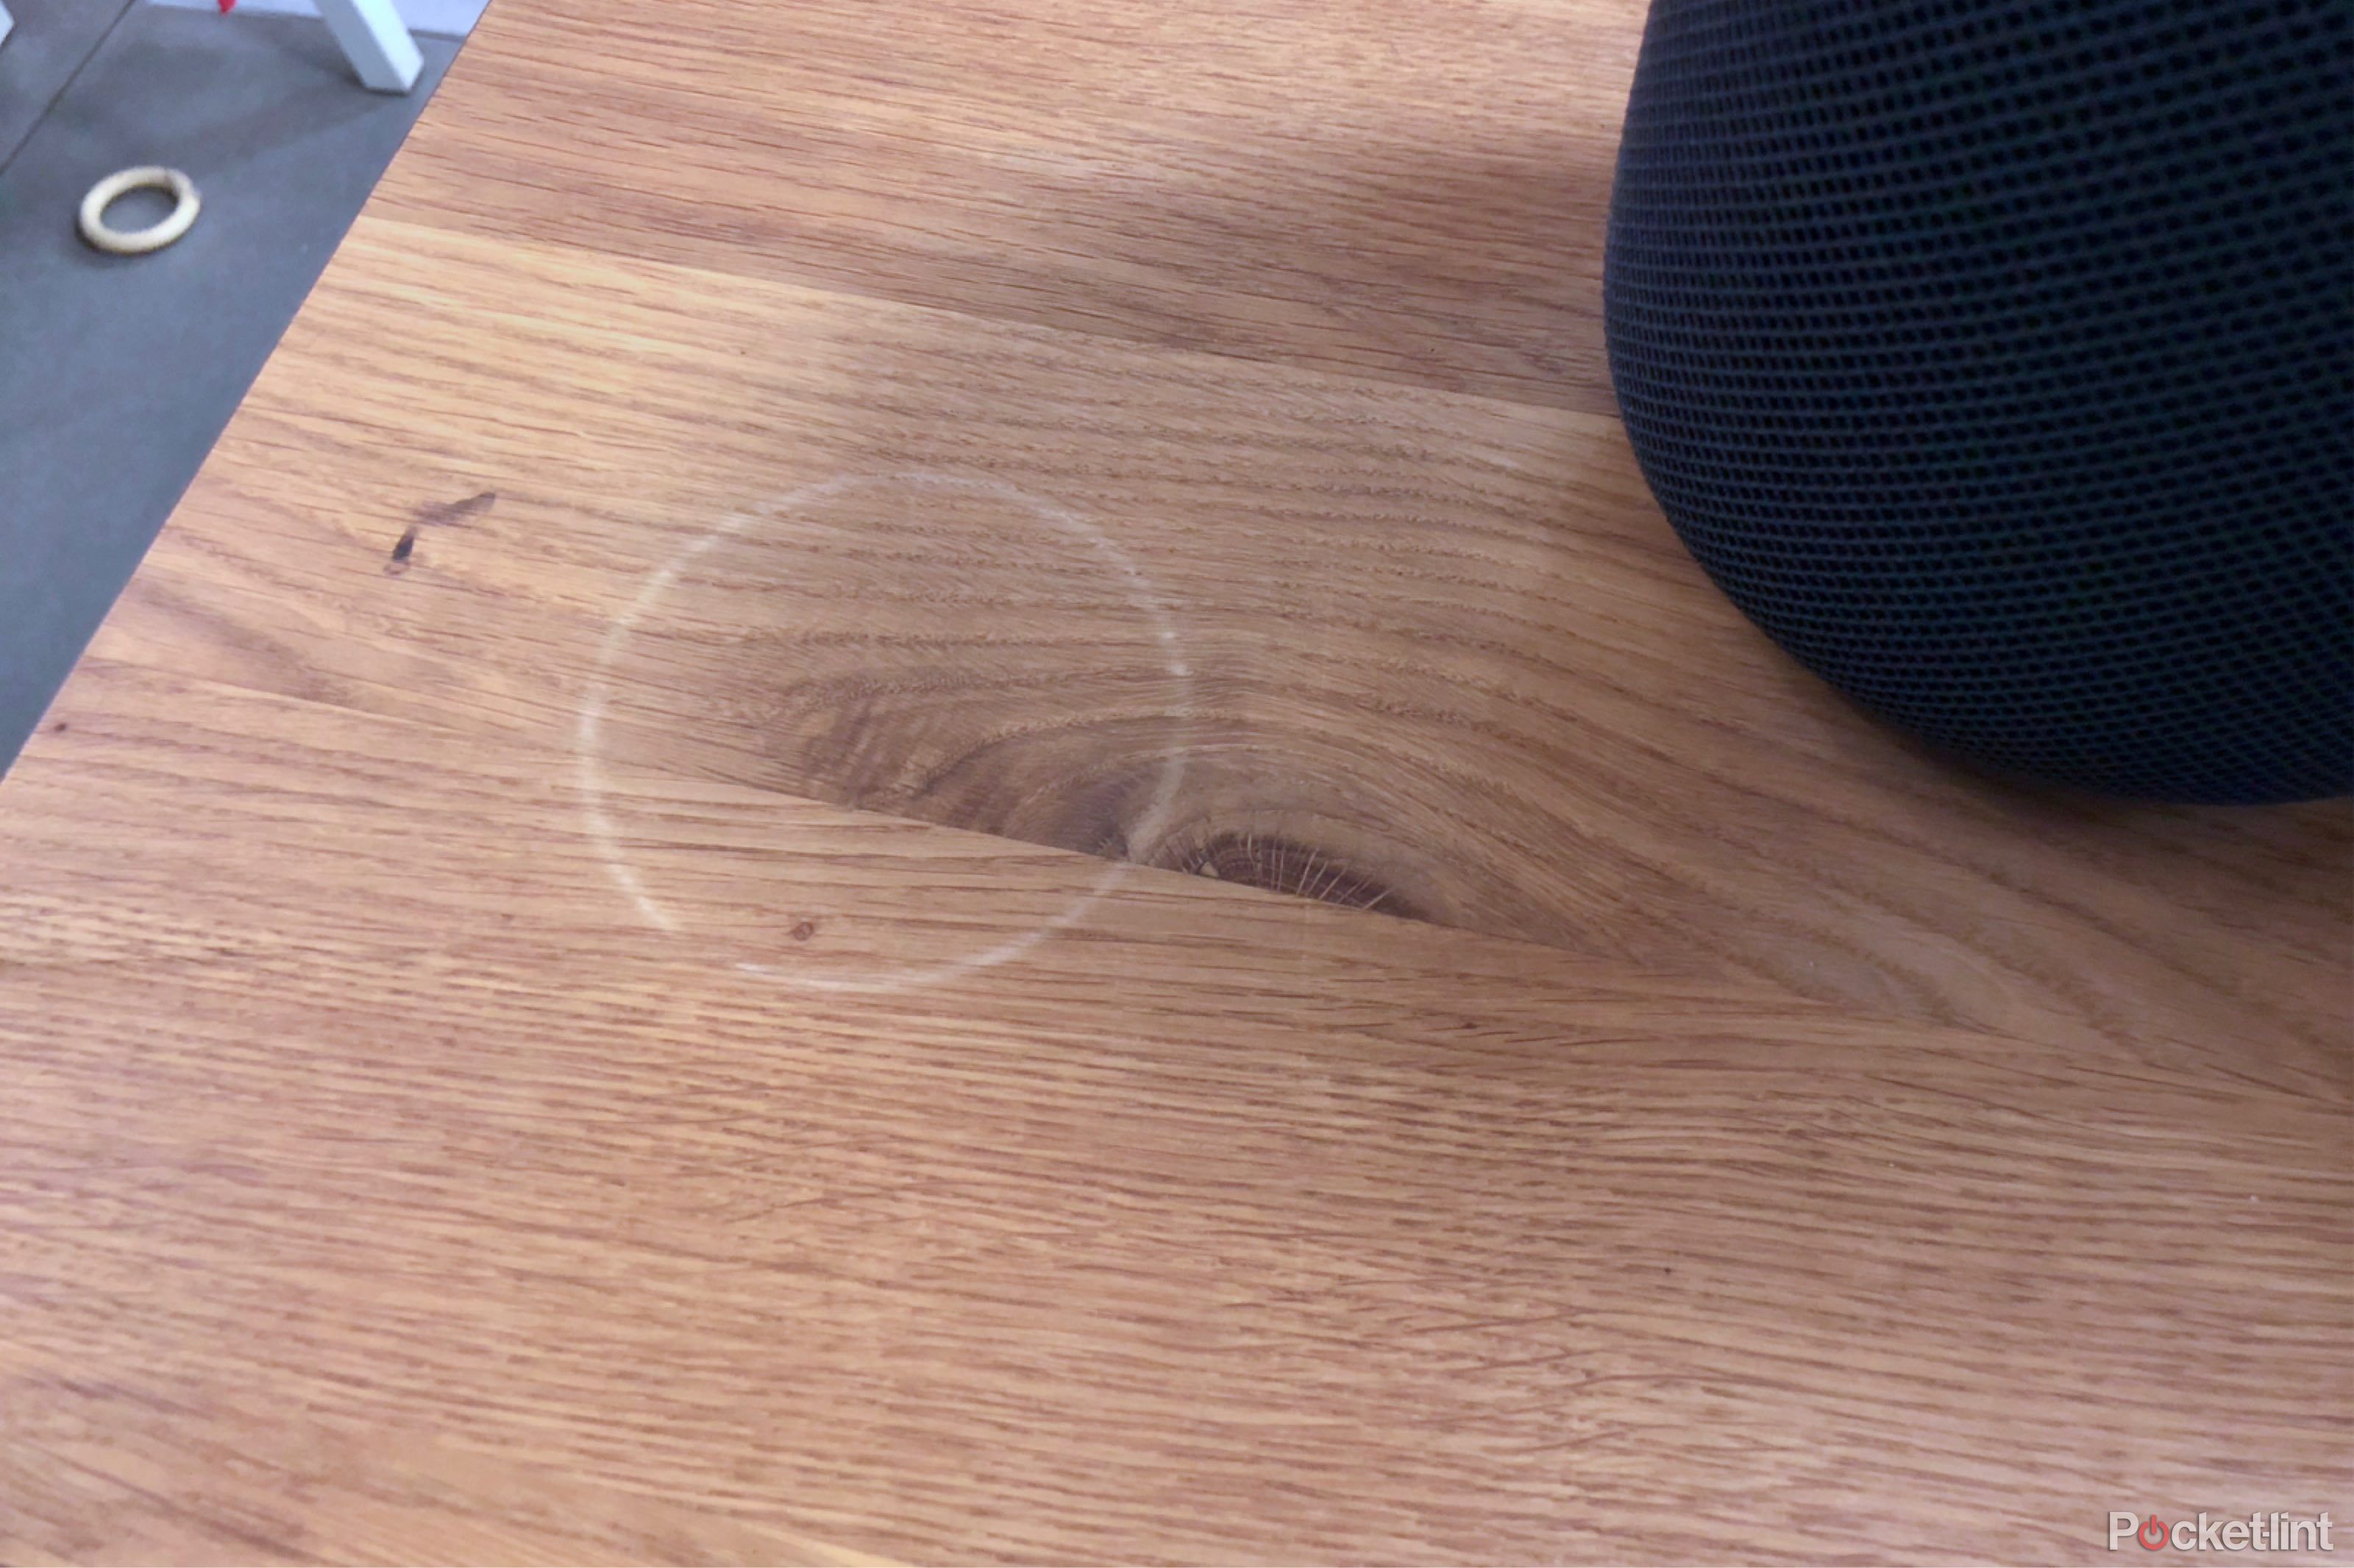 Ringgate How to stop HomePod from leaving rings on wood furniture image 1